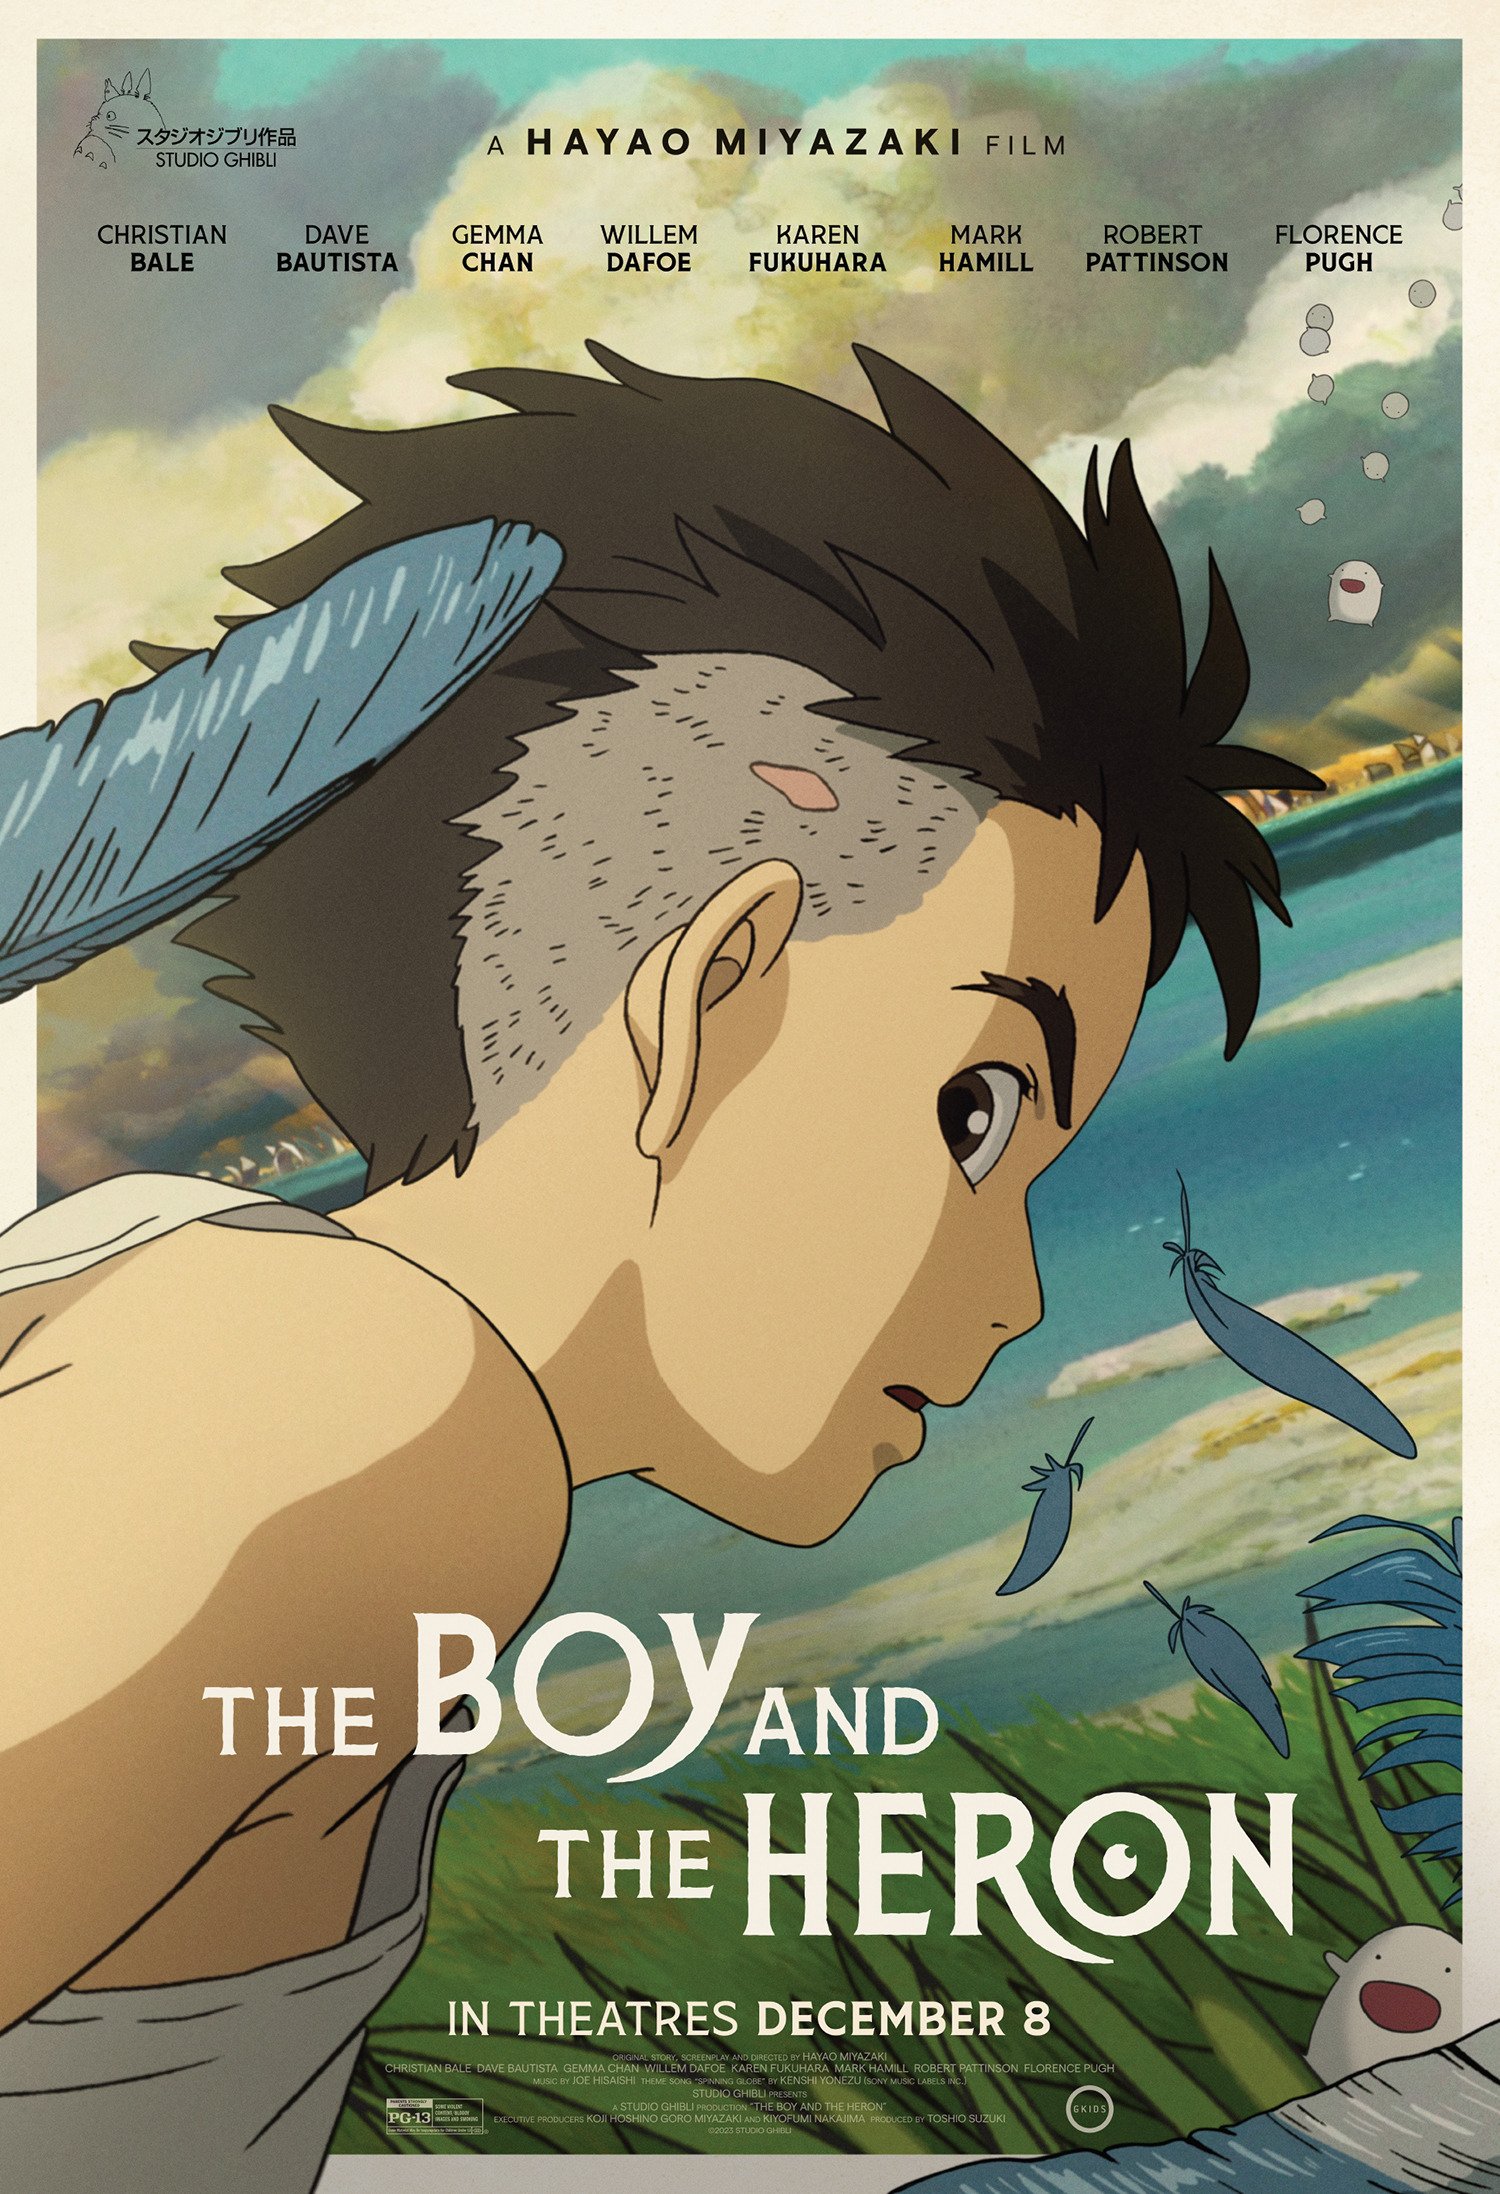 The Boy And The Heron images © Studio Ghibli